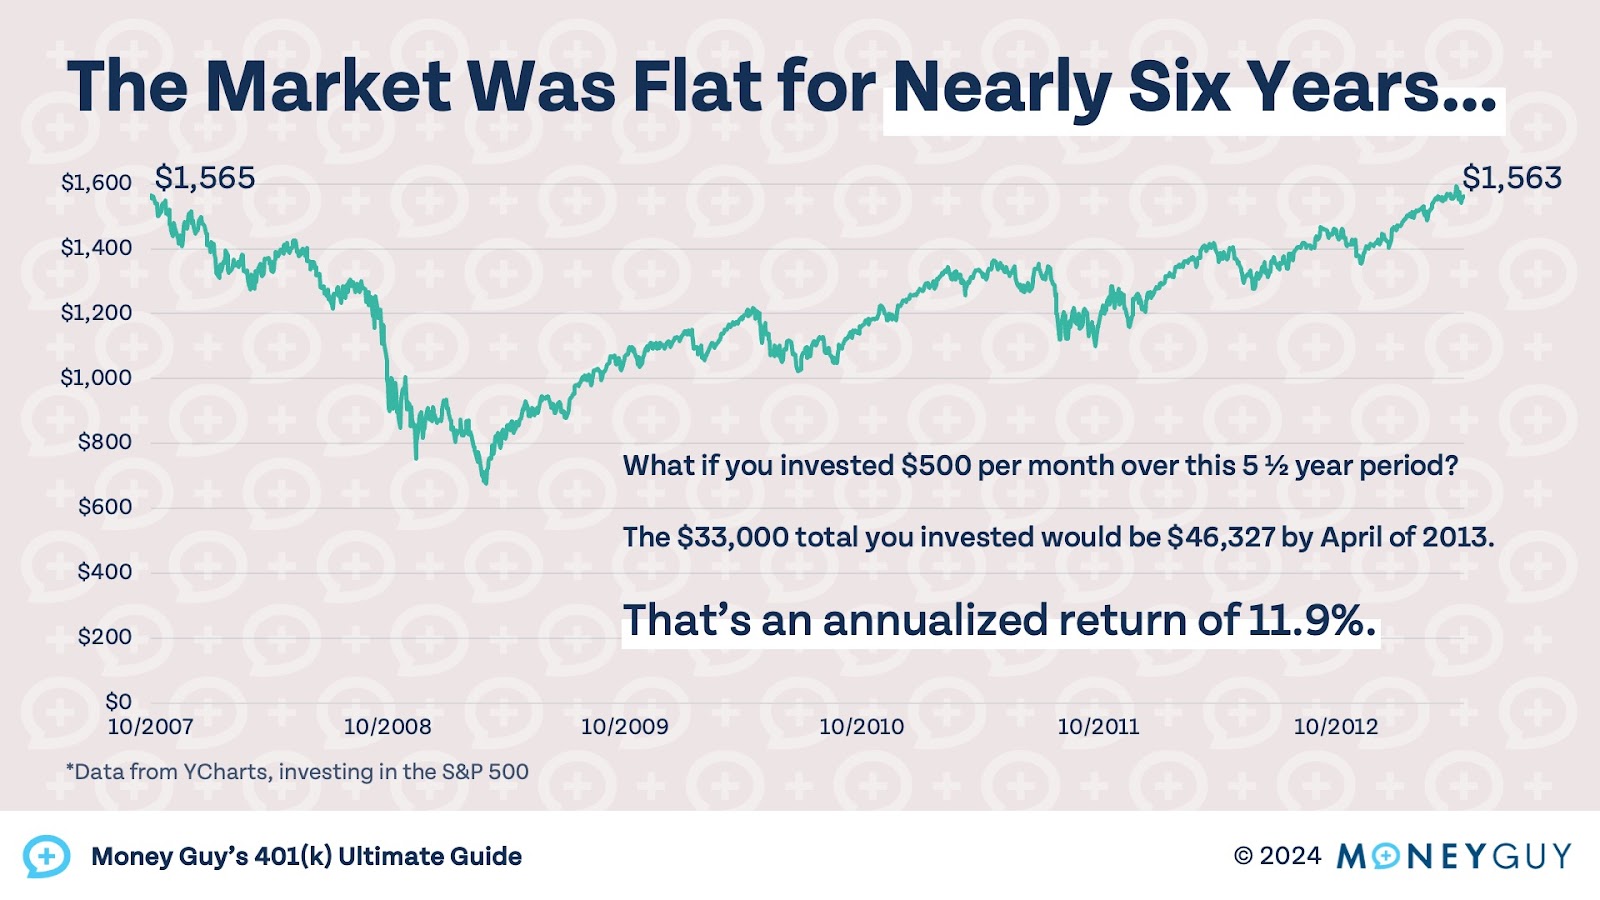 A chart showing the stock market was flat for nearly six years from 2007 to 2013.